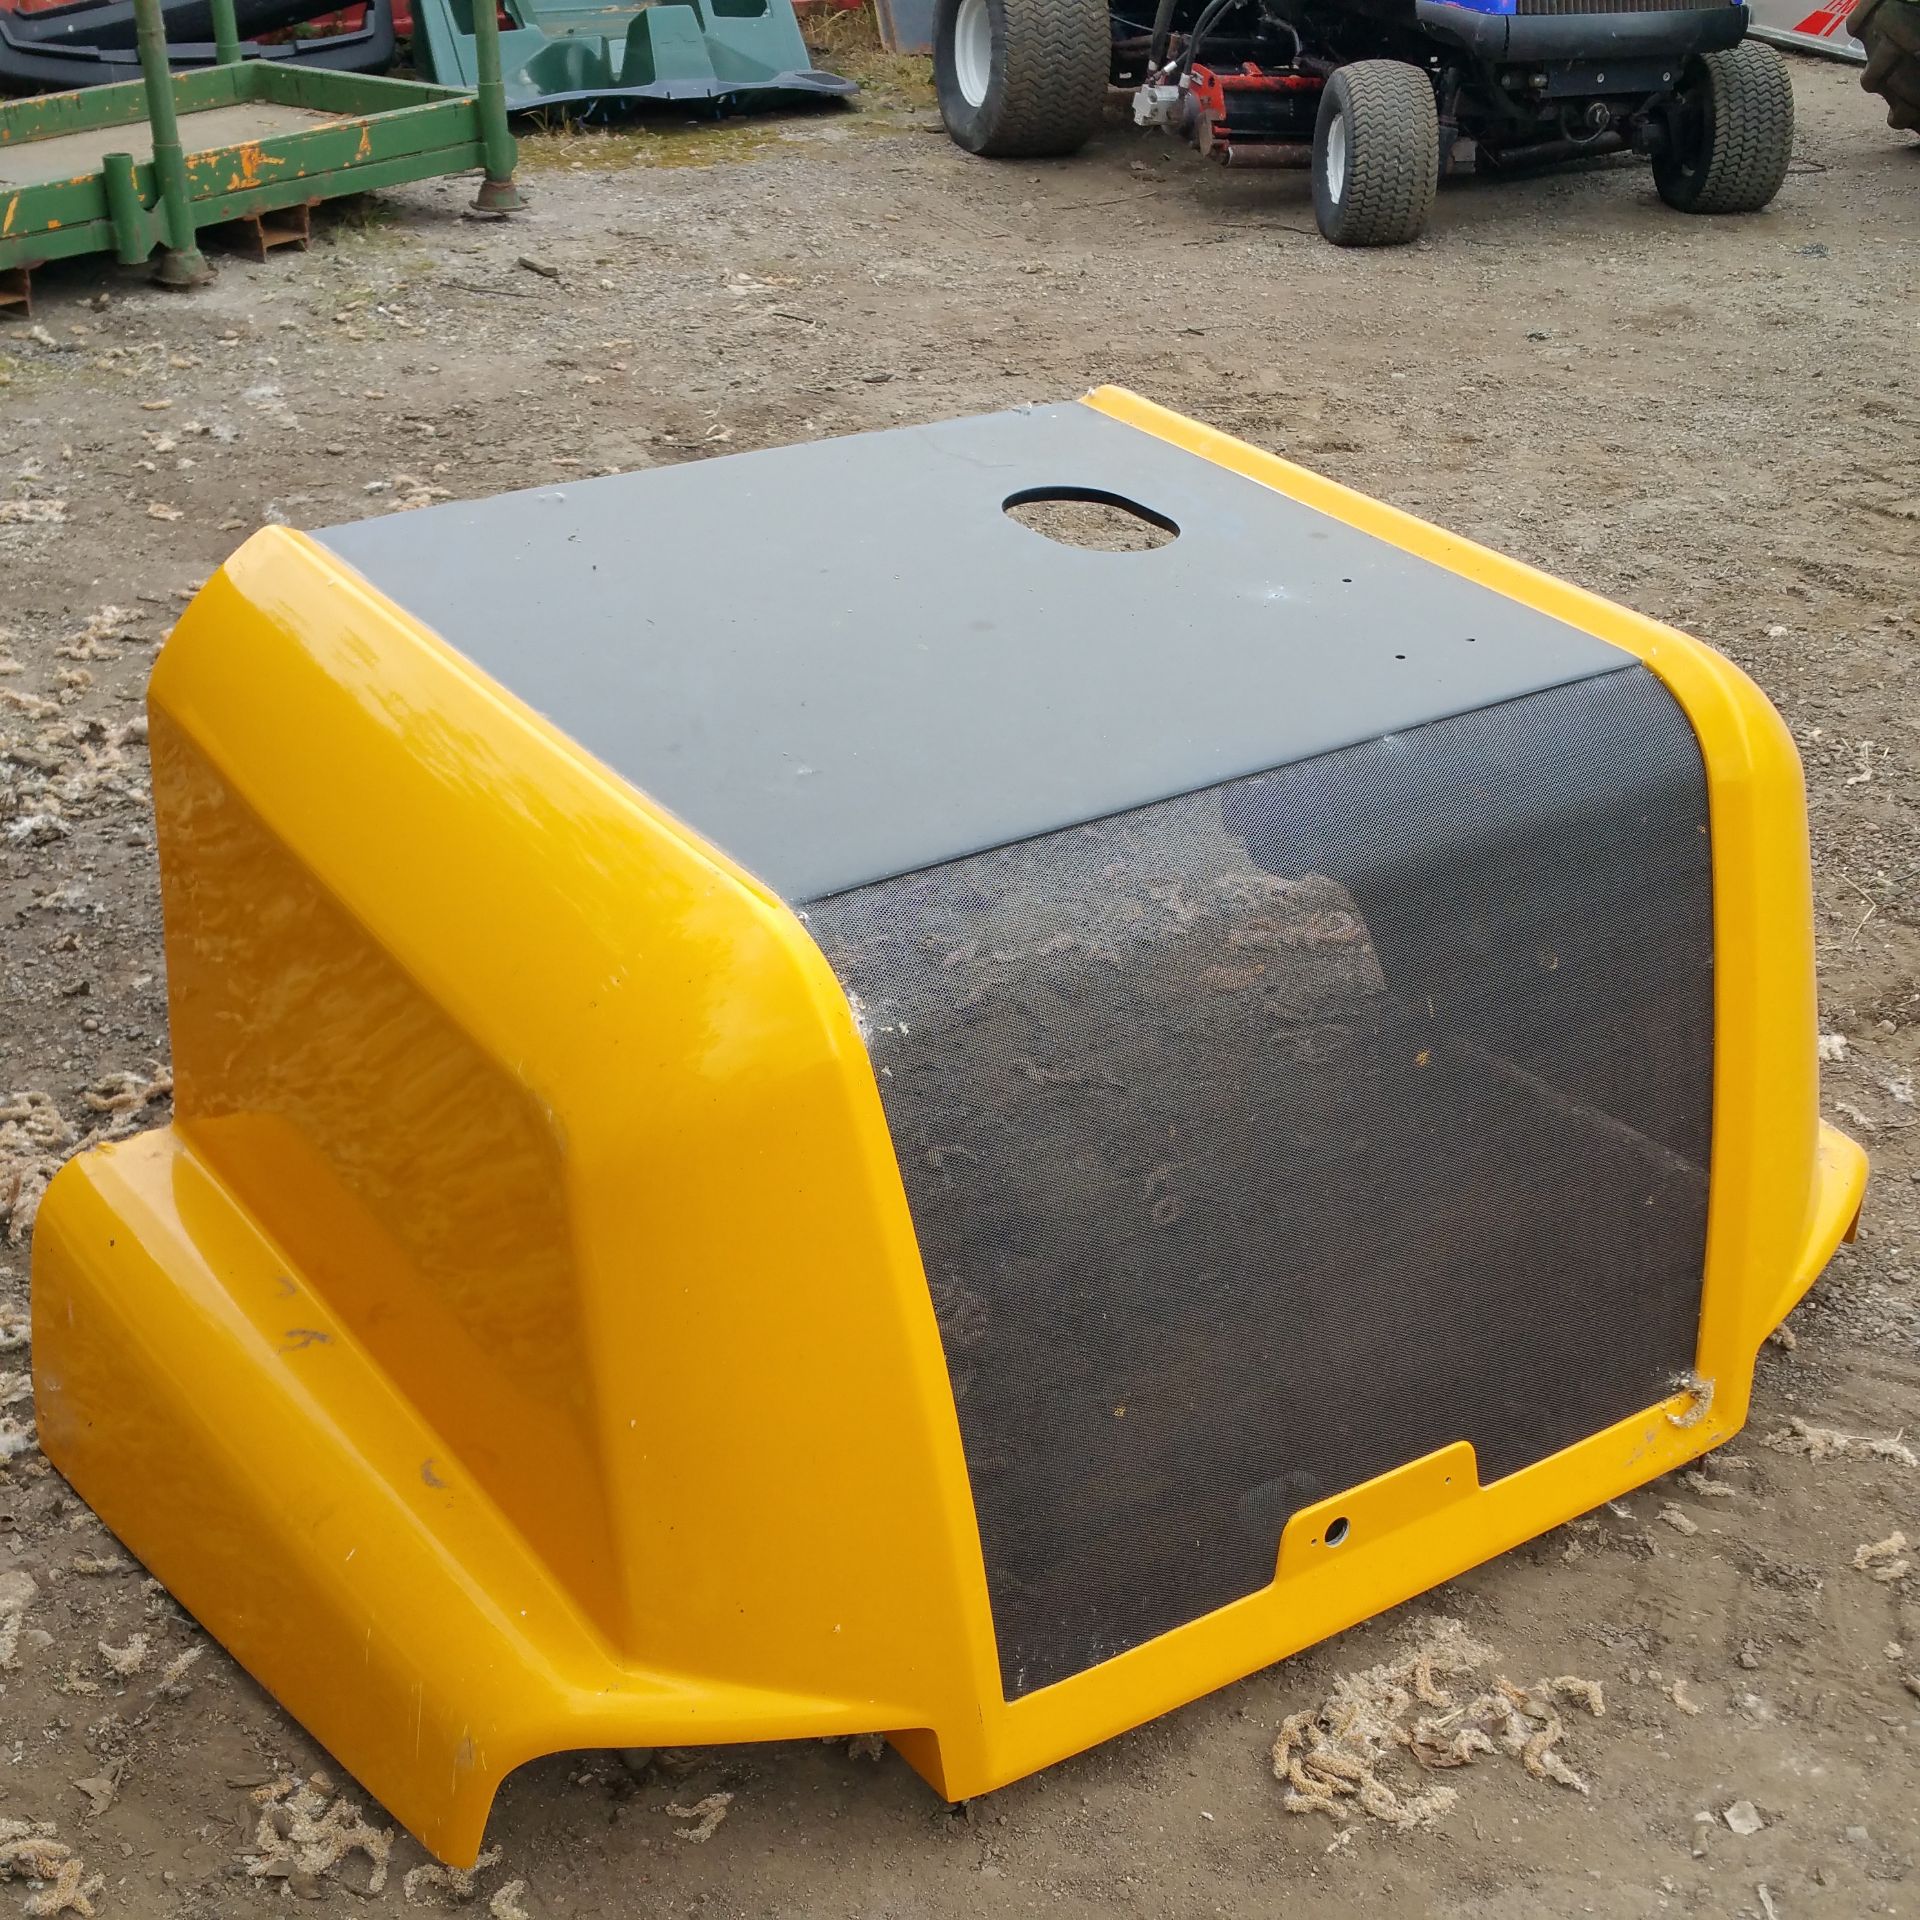 Jcb TM310 bonnet   New and unused   Delivery arranged